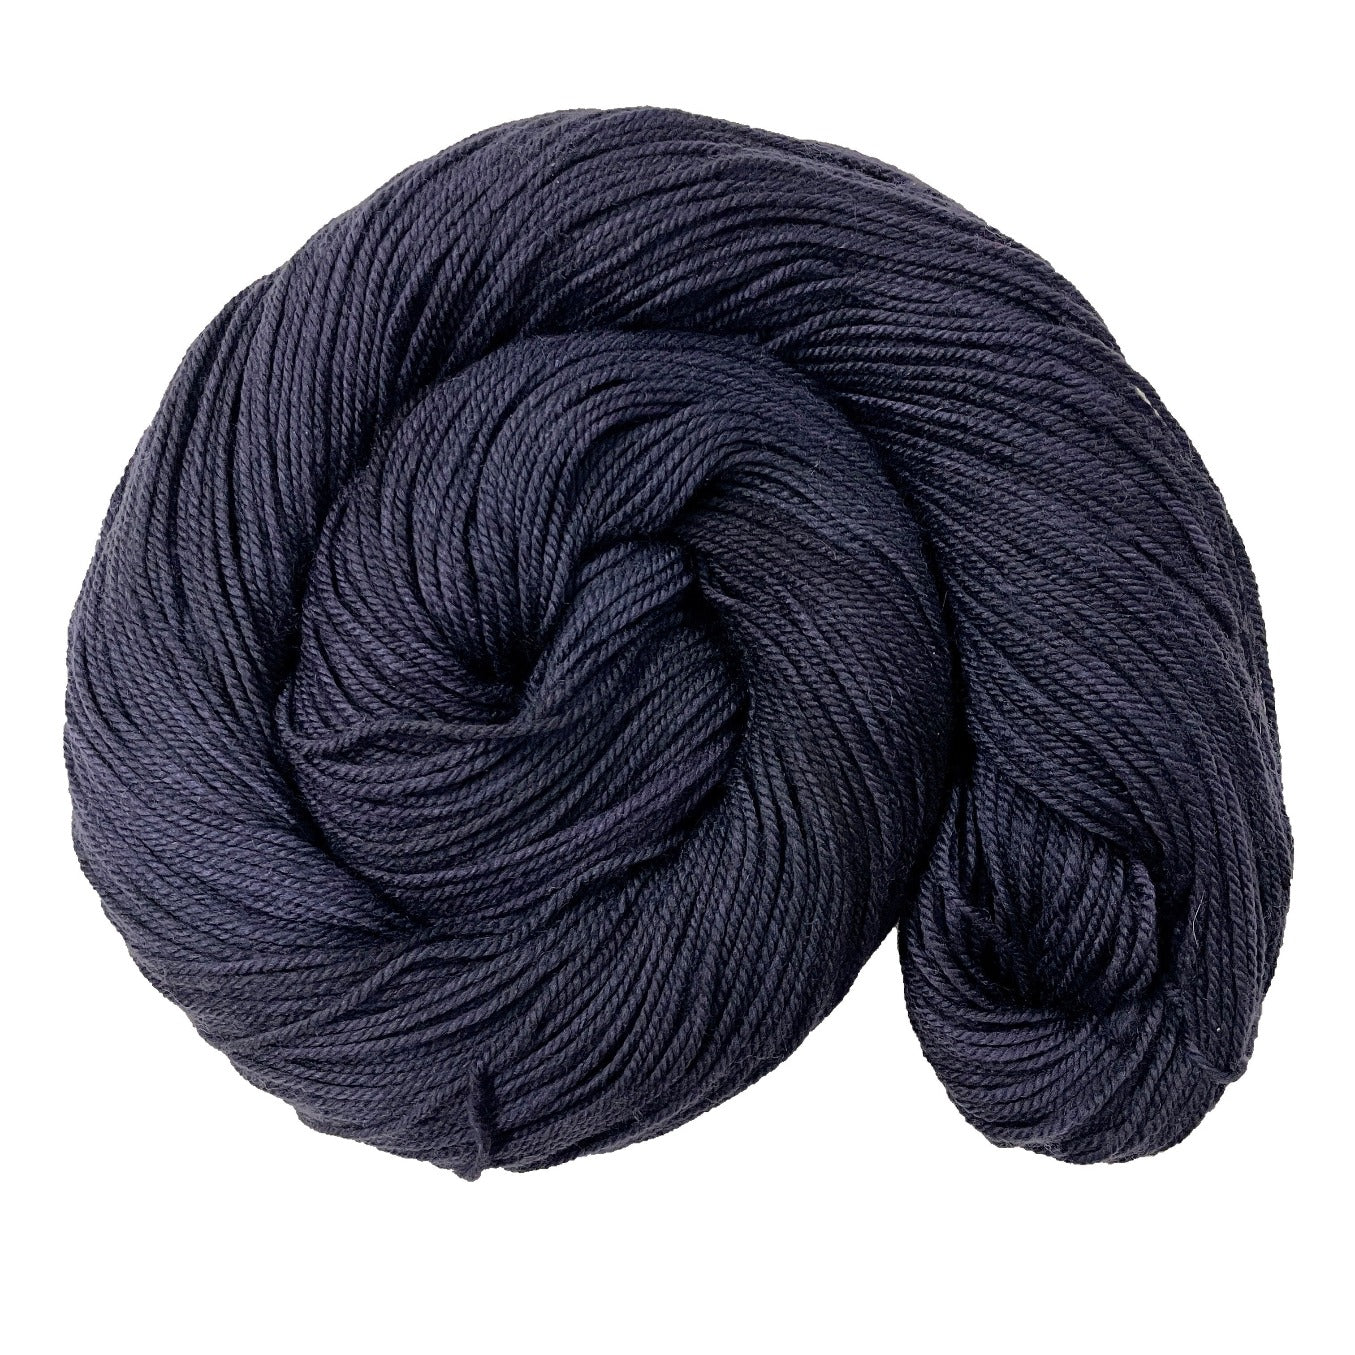 Photo of the Crow colorway by Knitted Wit Sport